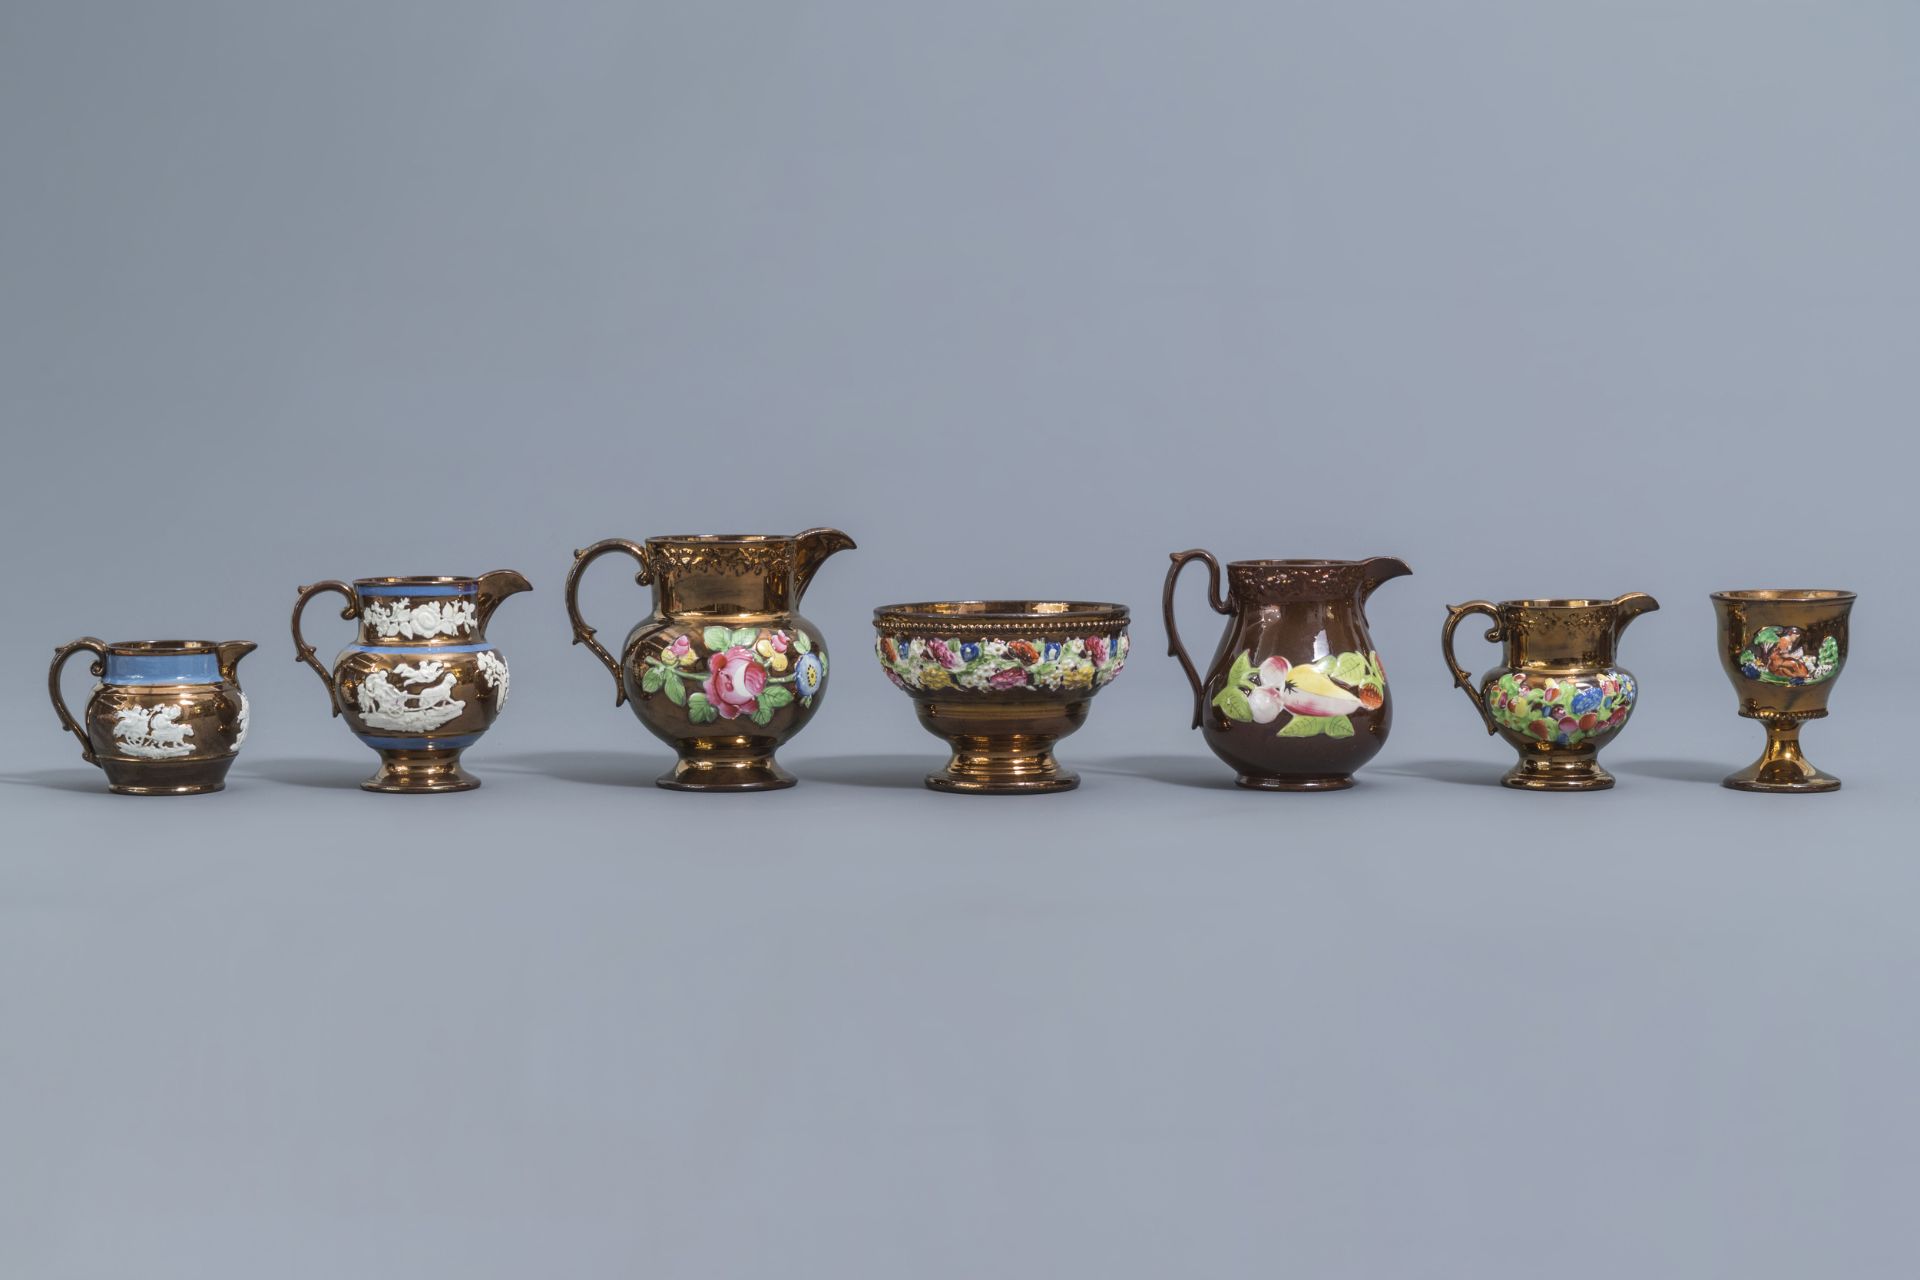 A varied collection of English lustreware items with relief design, 19th C. - Image 4 of 50